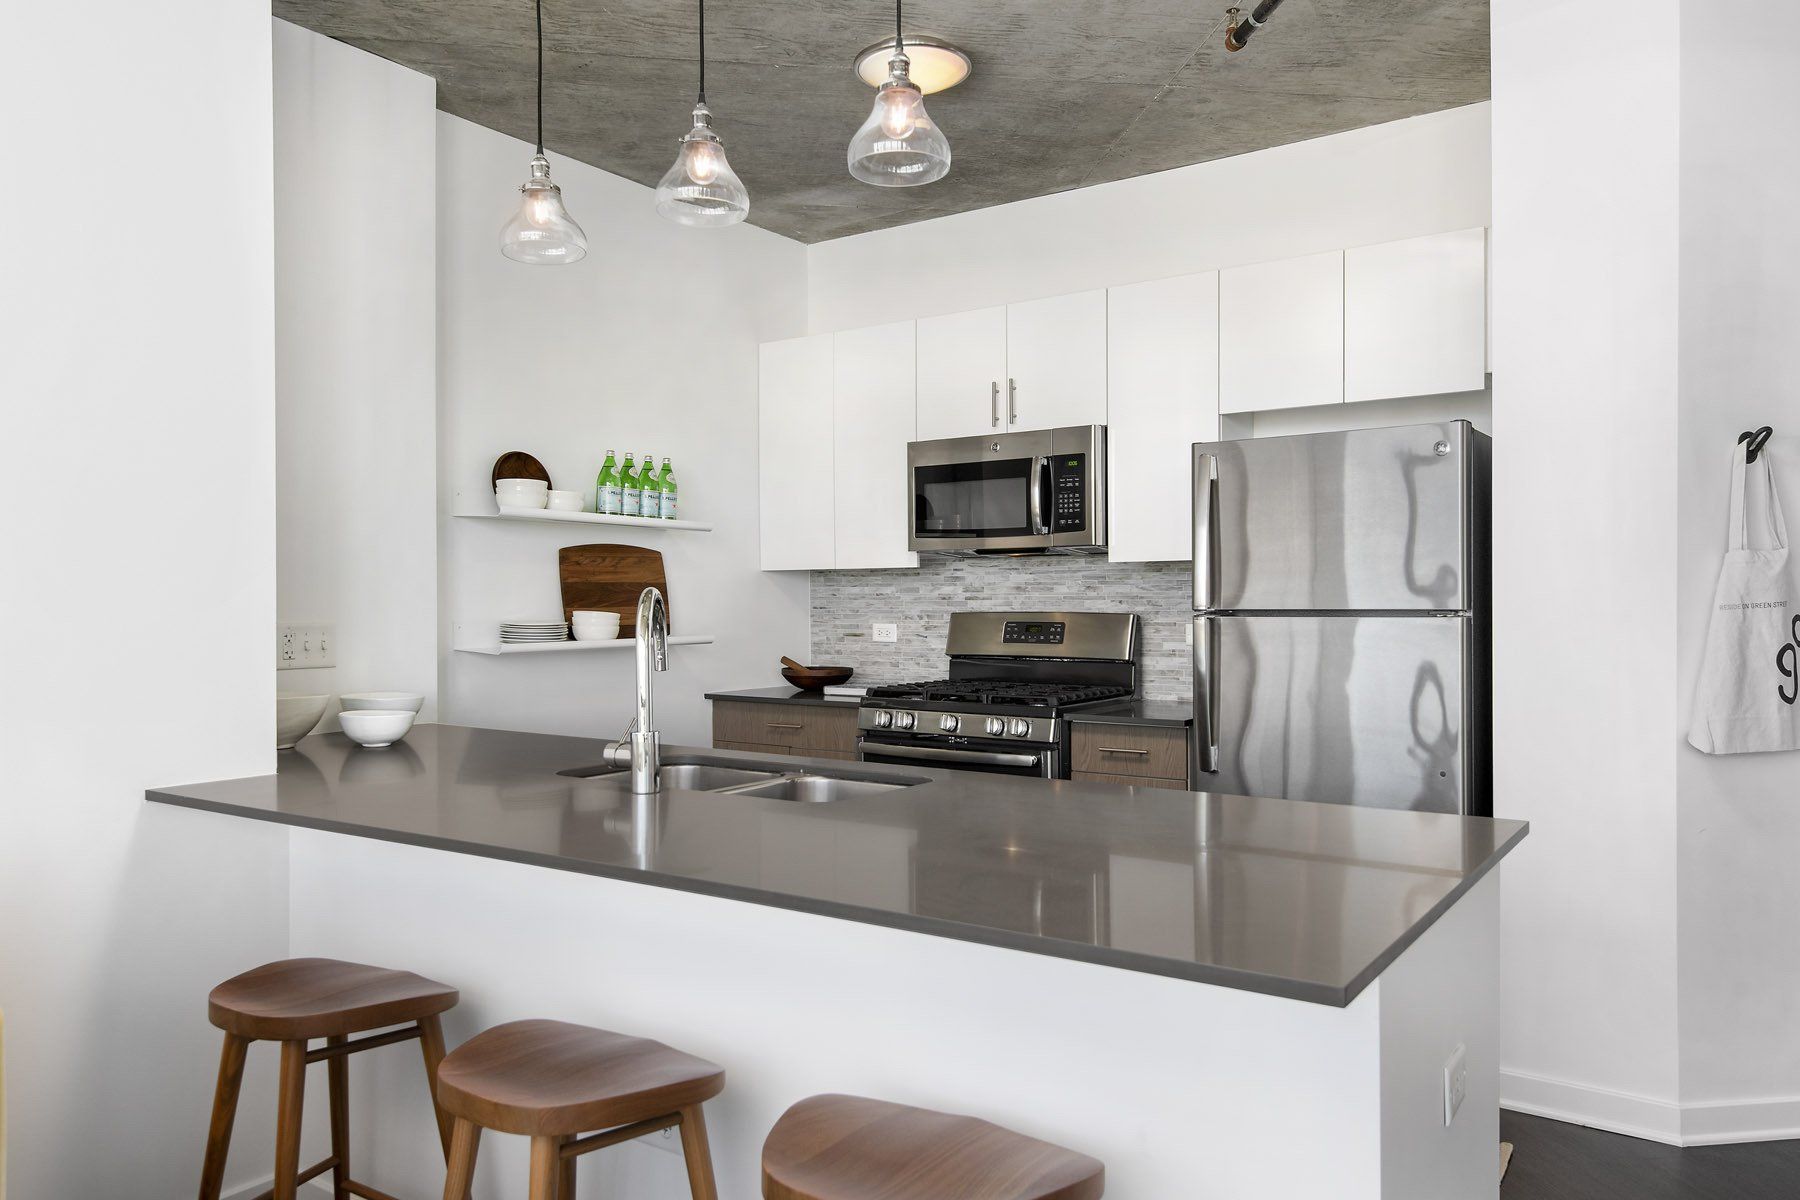 Modern kitchen with breakfast bar and stainless steel appliances at Reside on Green Street.